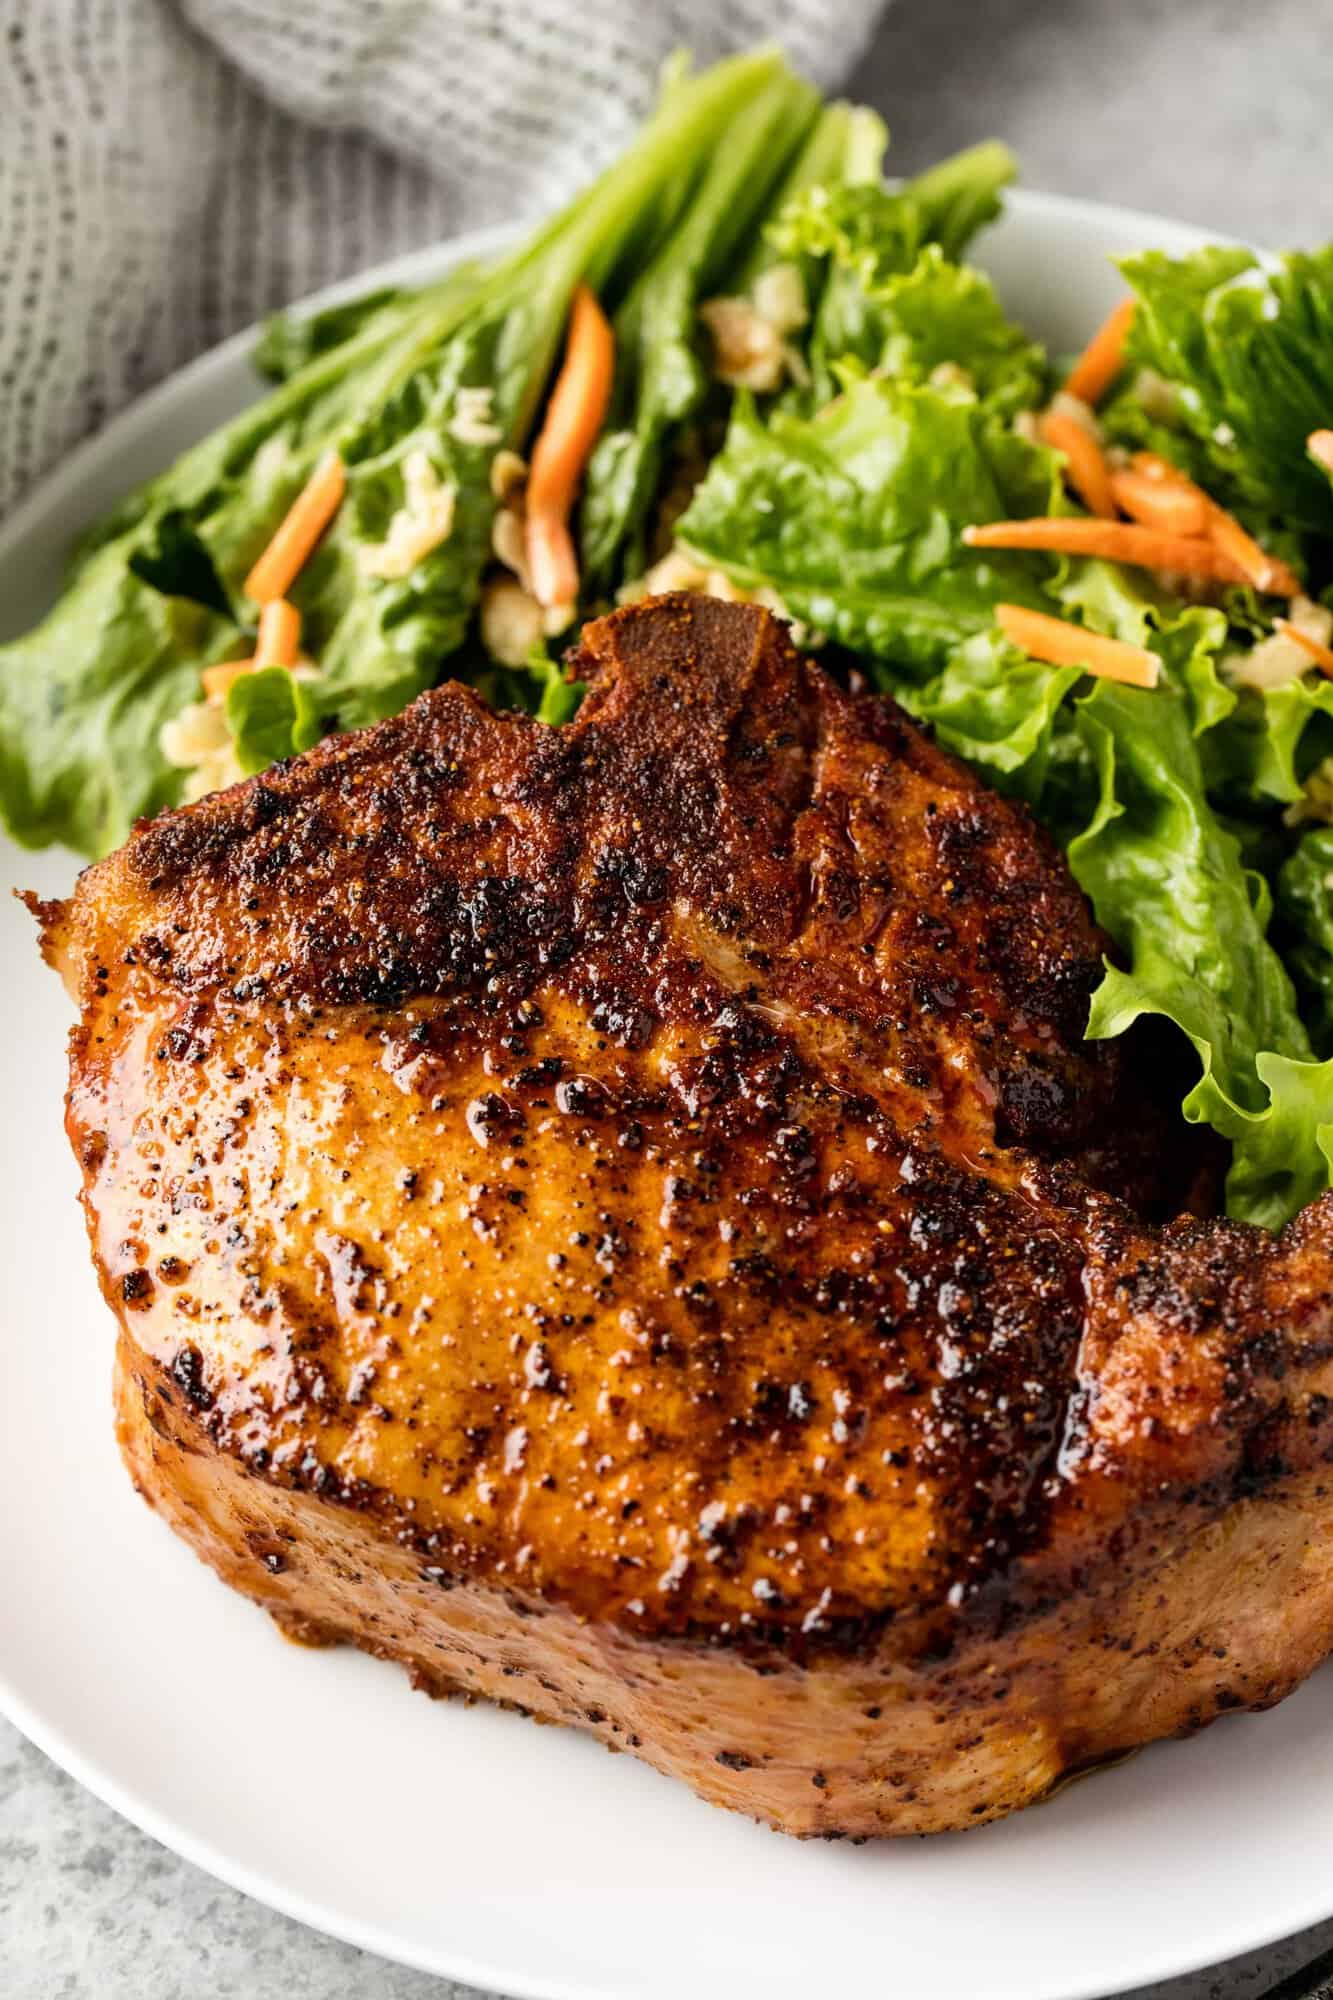 Learn how to make Smoked Pork Chops on a smoker. This recipe is perfect for beginner meat smoking and produces a juicy, smoke filled thick pork chop that is to die for!